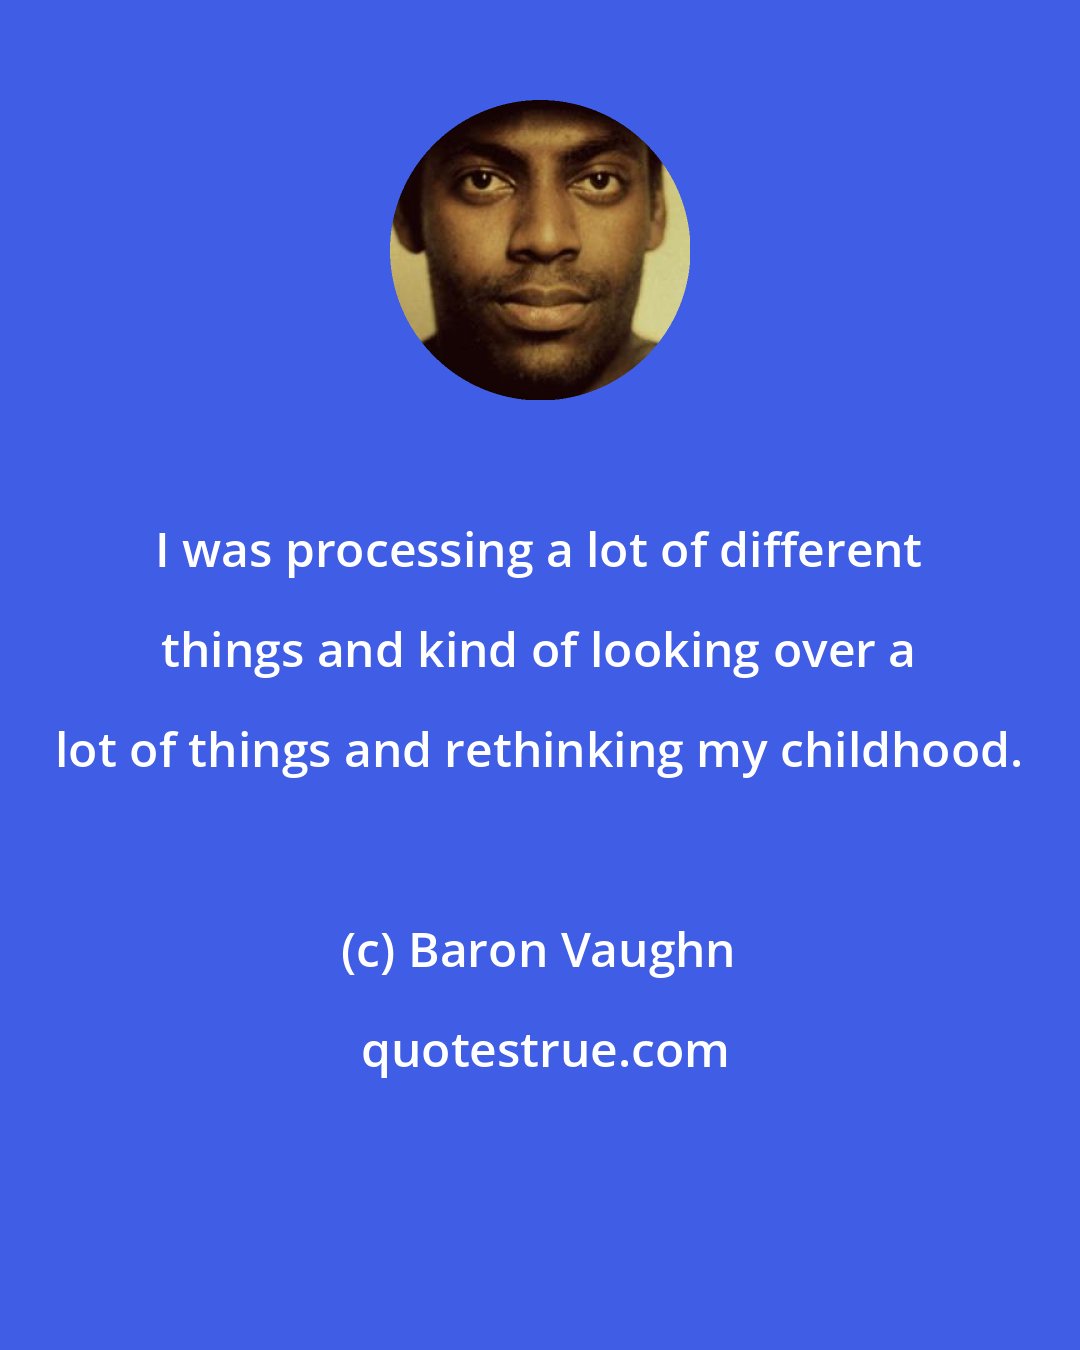 Baron Vaughn: I was processing a lot of different things and kind of looking over a lot of things and rethinking my childhood.